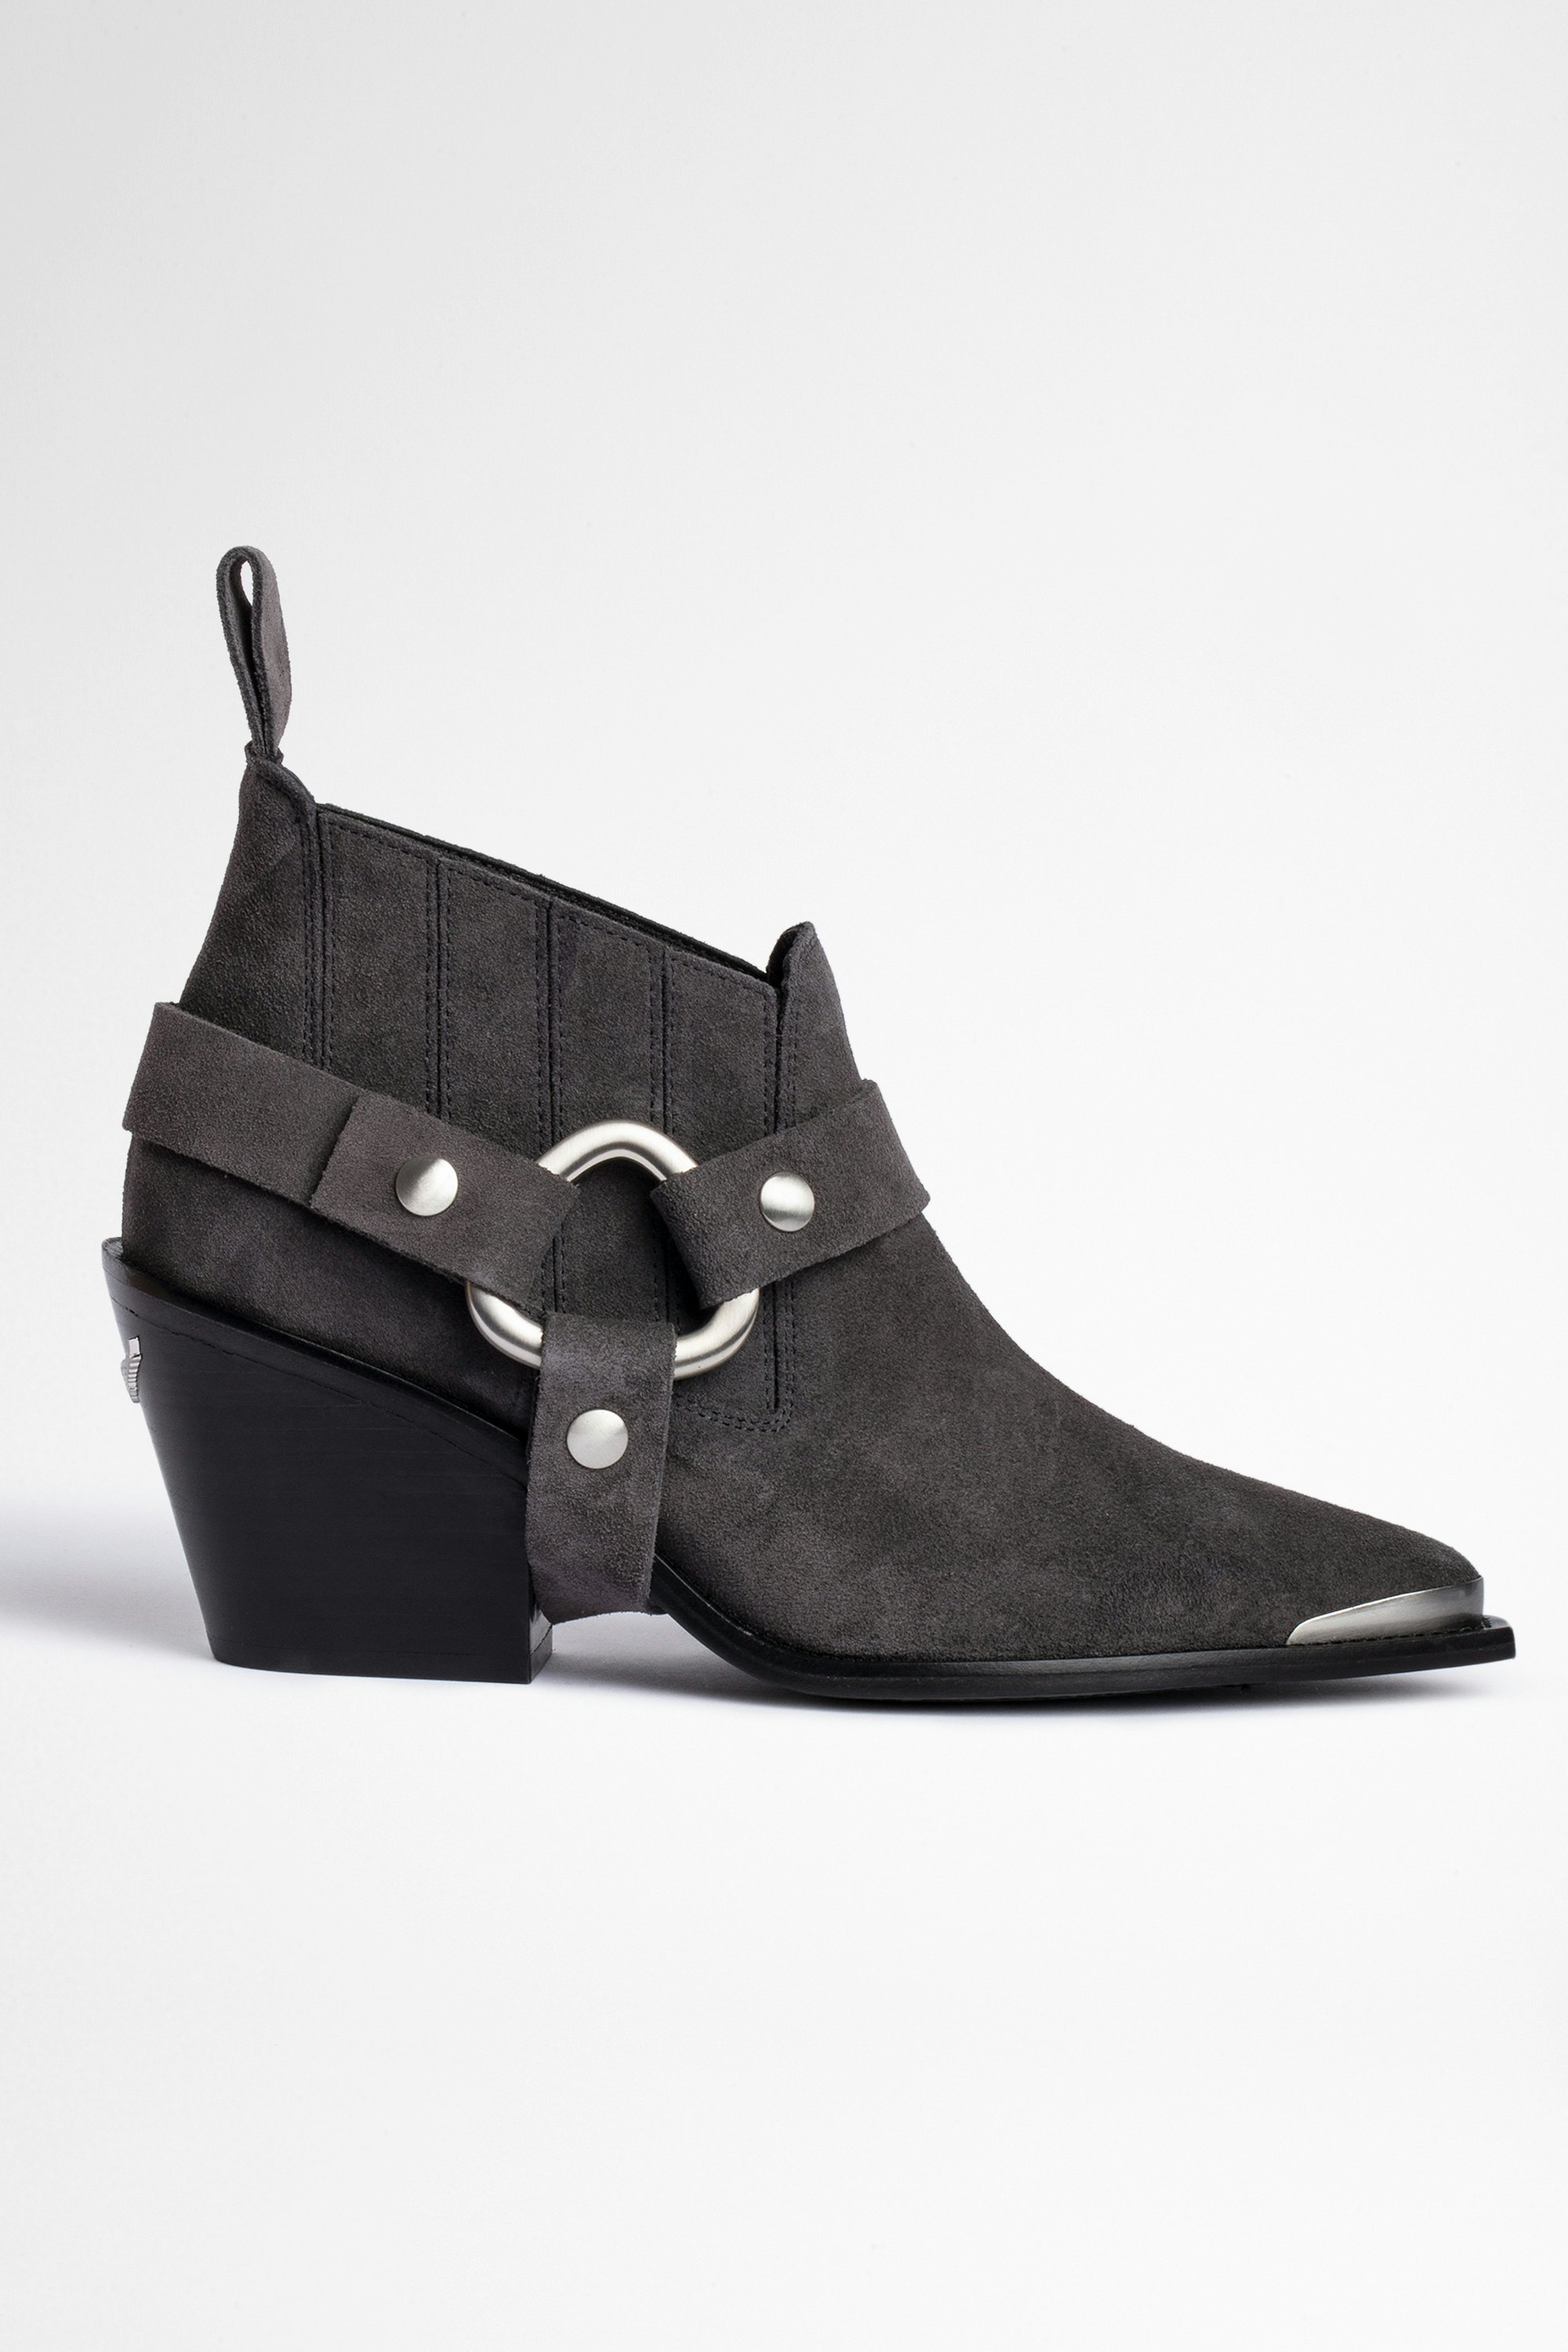 N’Dricks Ankle Boots Women’s low suede street-style ankle boots with strap